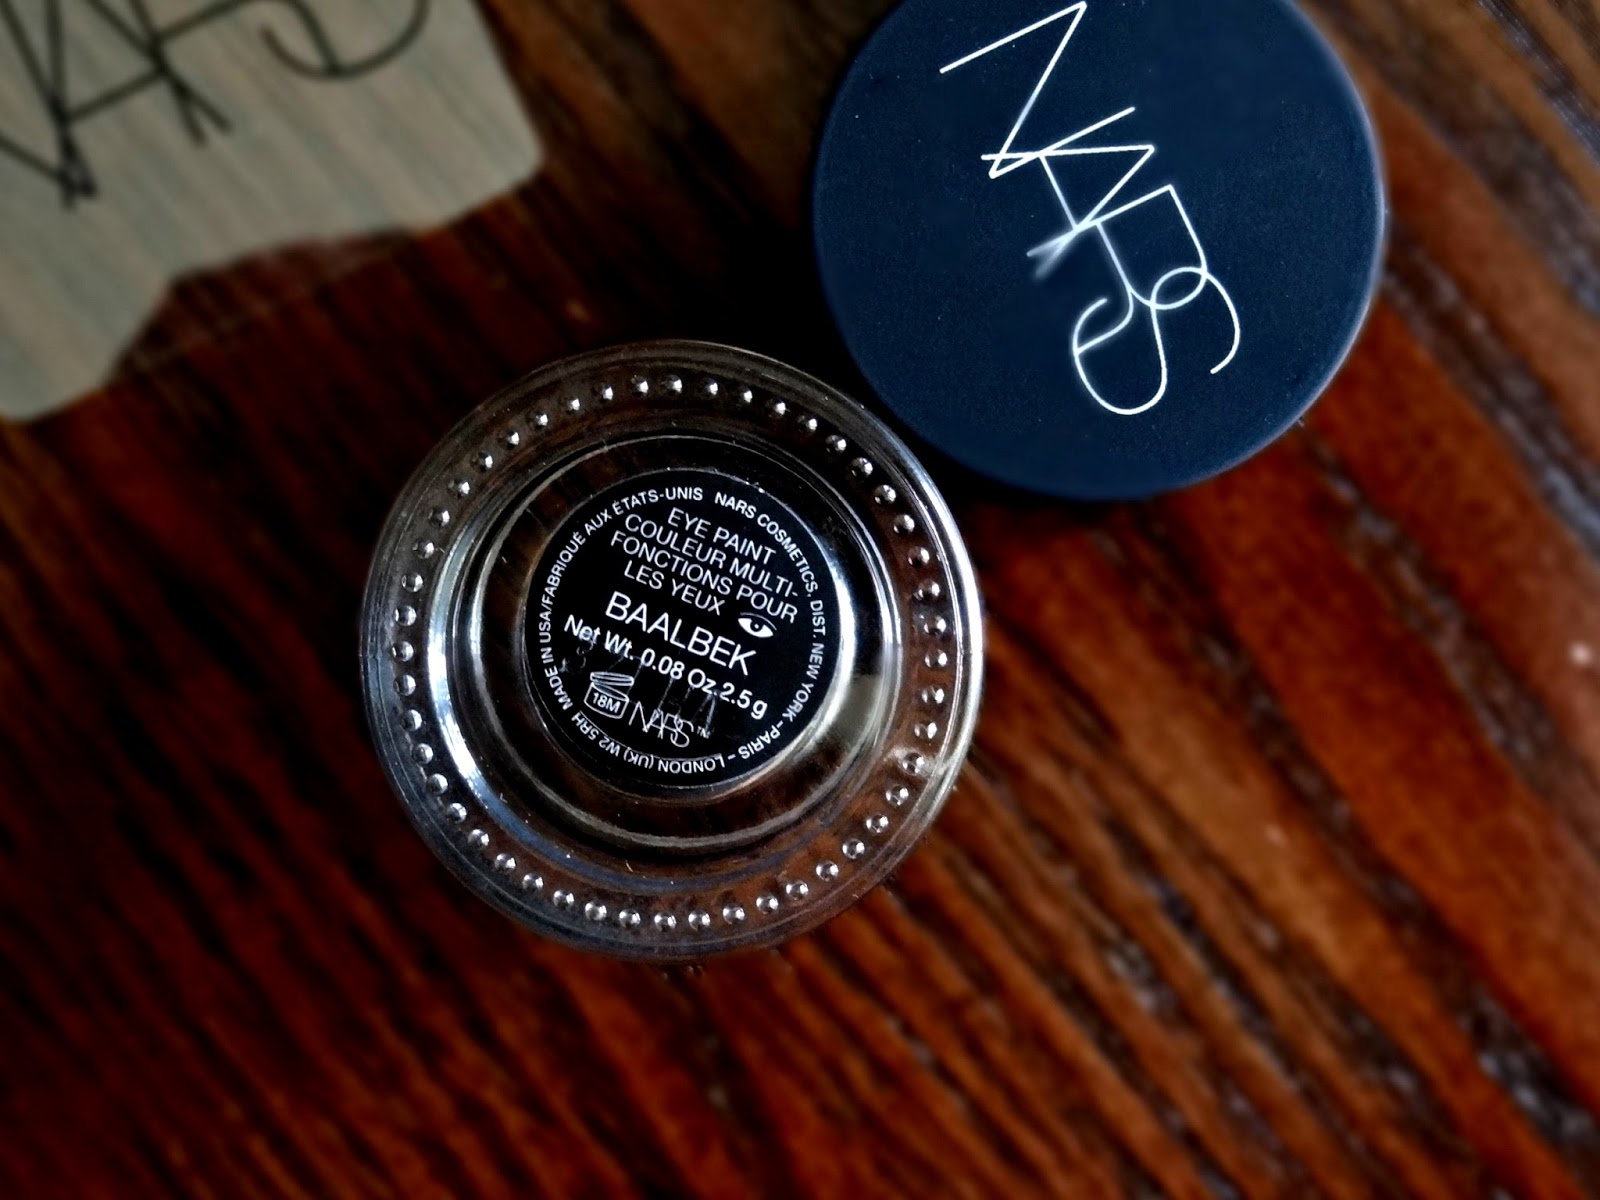 NARS Baalbek Eye Paint NARS Adult Swim Summer 2014 Collection Review, Photos, Swatches, EOTD